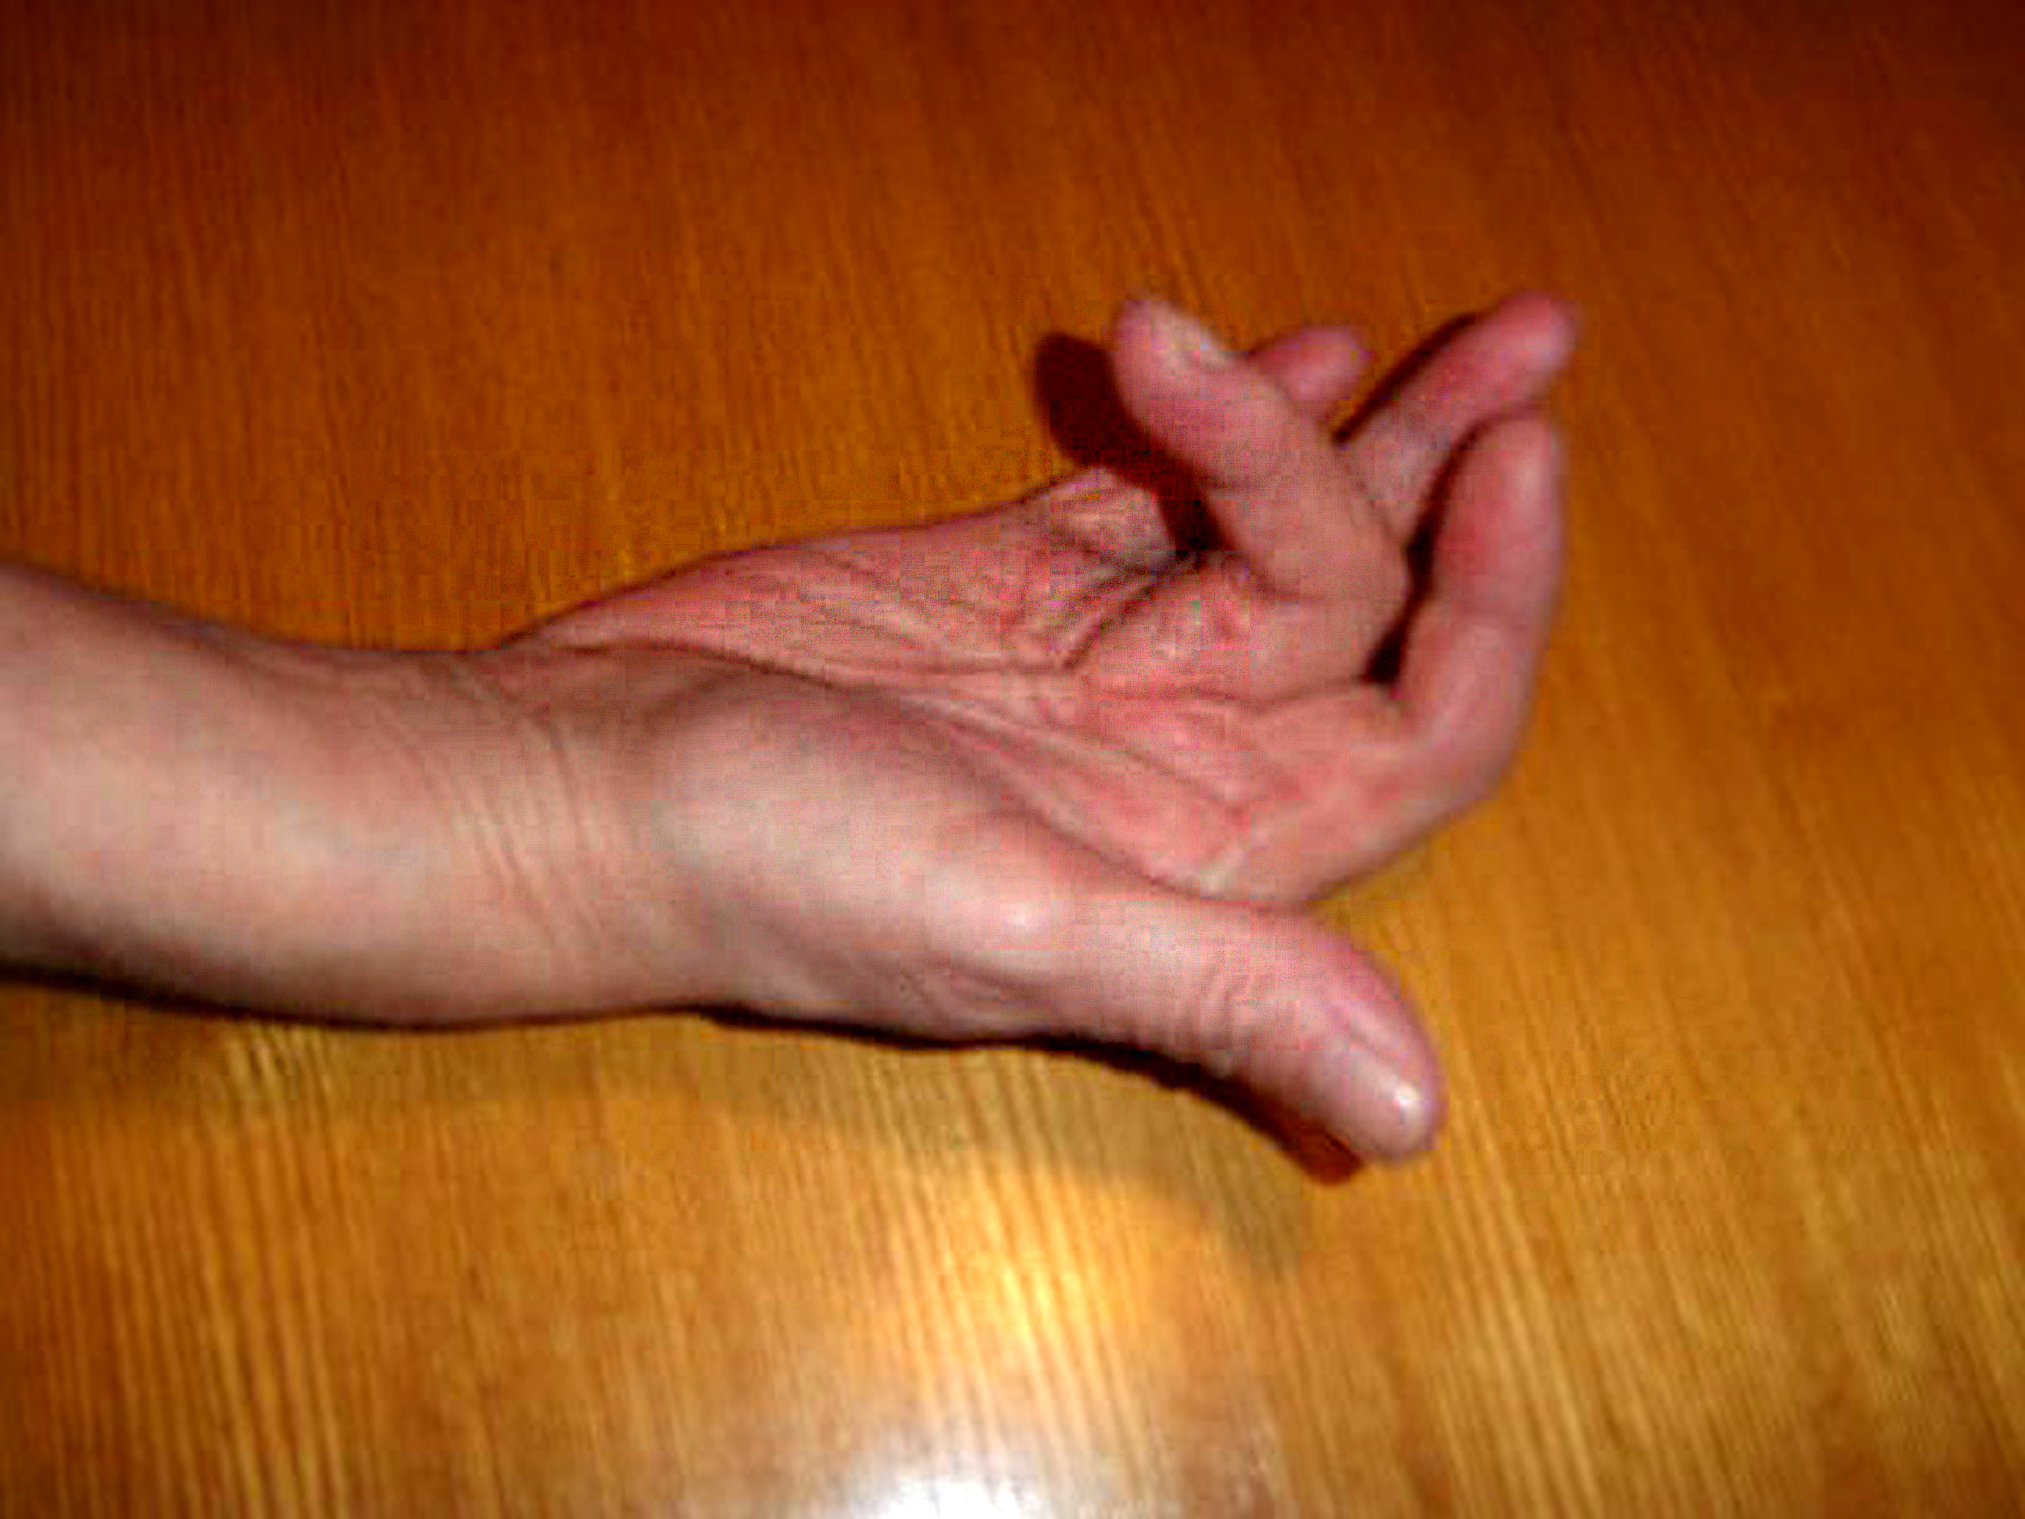 Dupuytren's contracture. [commons.wikimedia.org/wiki/File:Dupuytren's_contracture.jpg/ Adapted from Wikimedia Commons.][4]